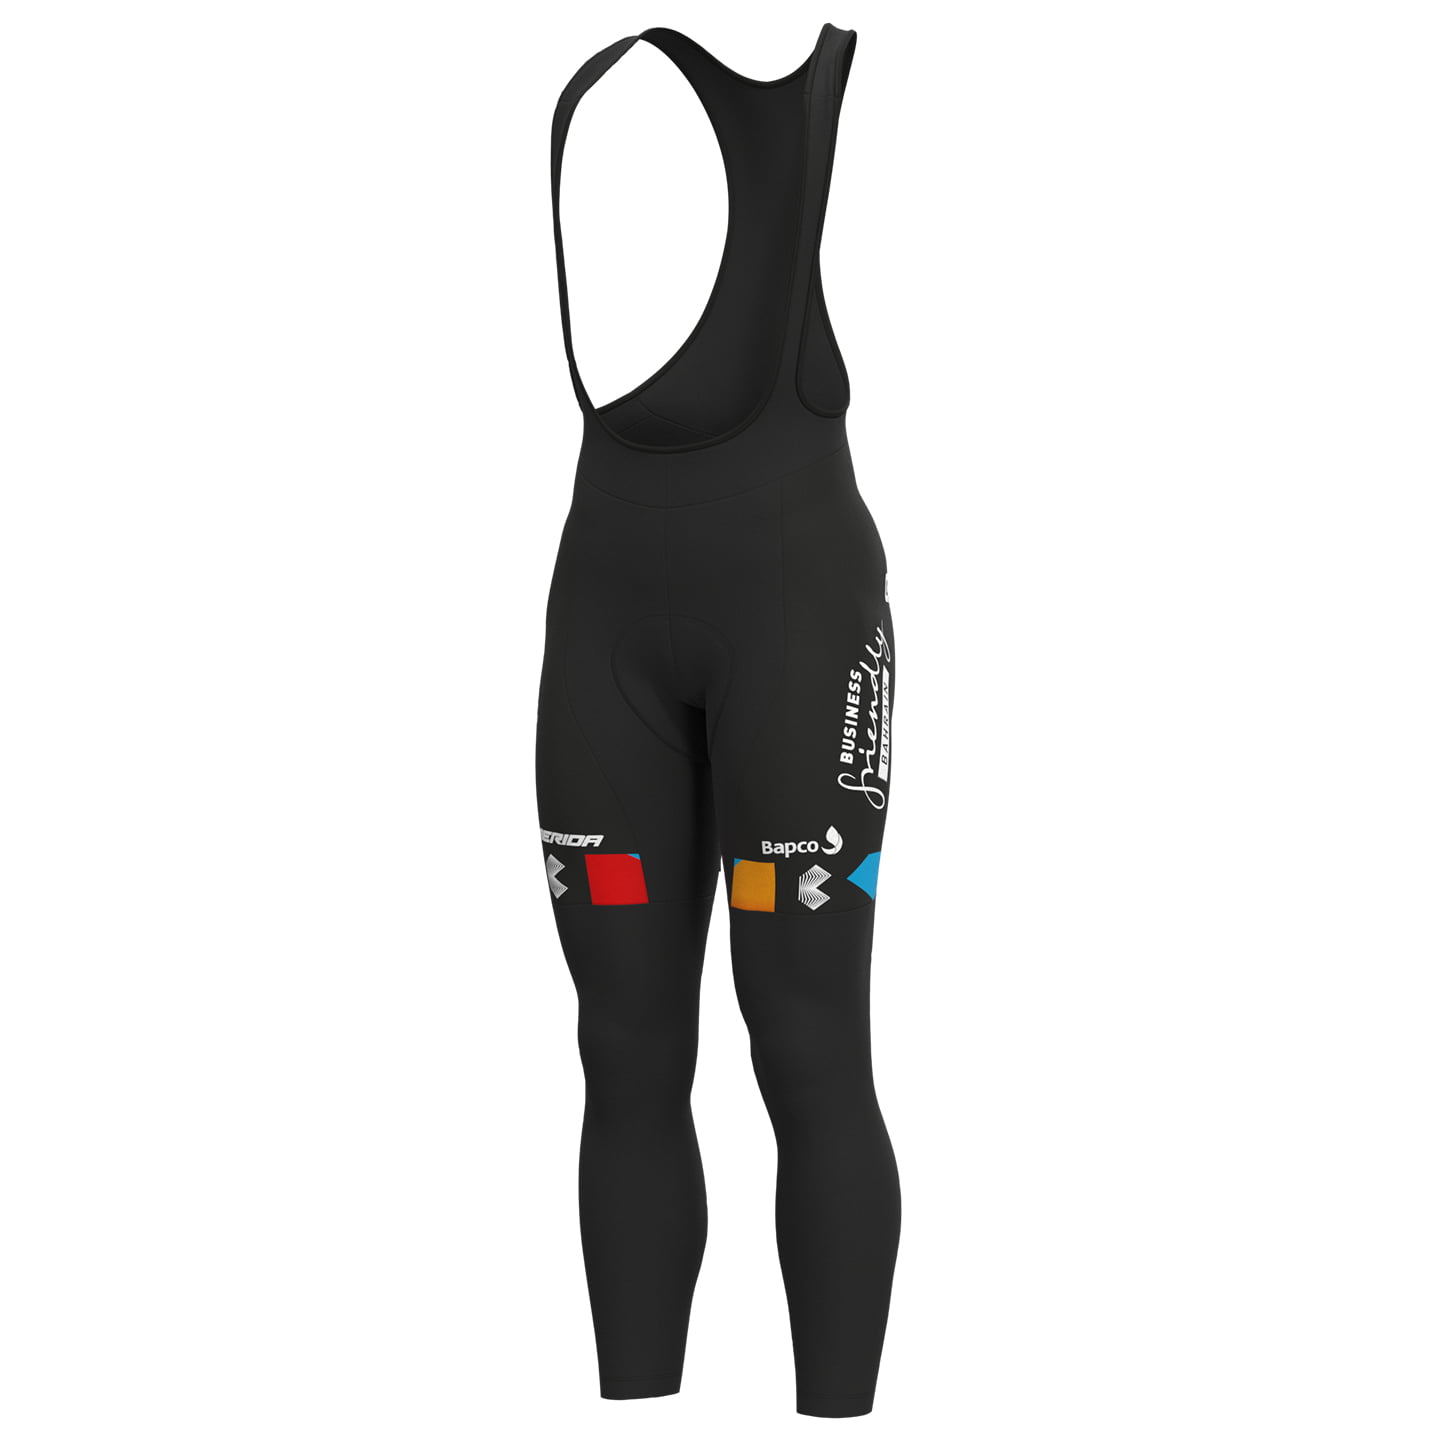 BAHRAIN - VICTORIOUS 2022 Bib Tights, for men, size S, Cycle tights, Cycling clothing